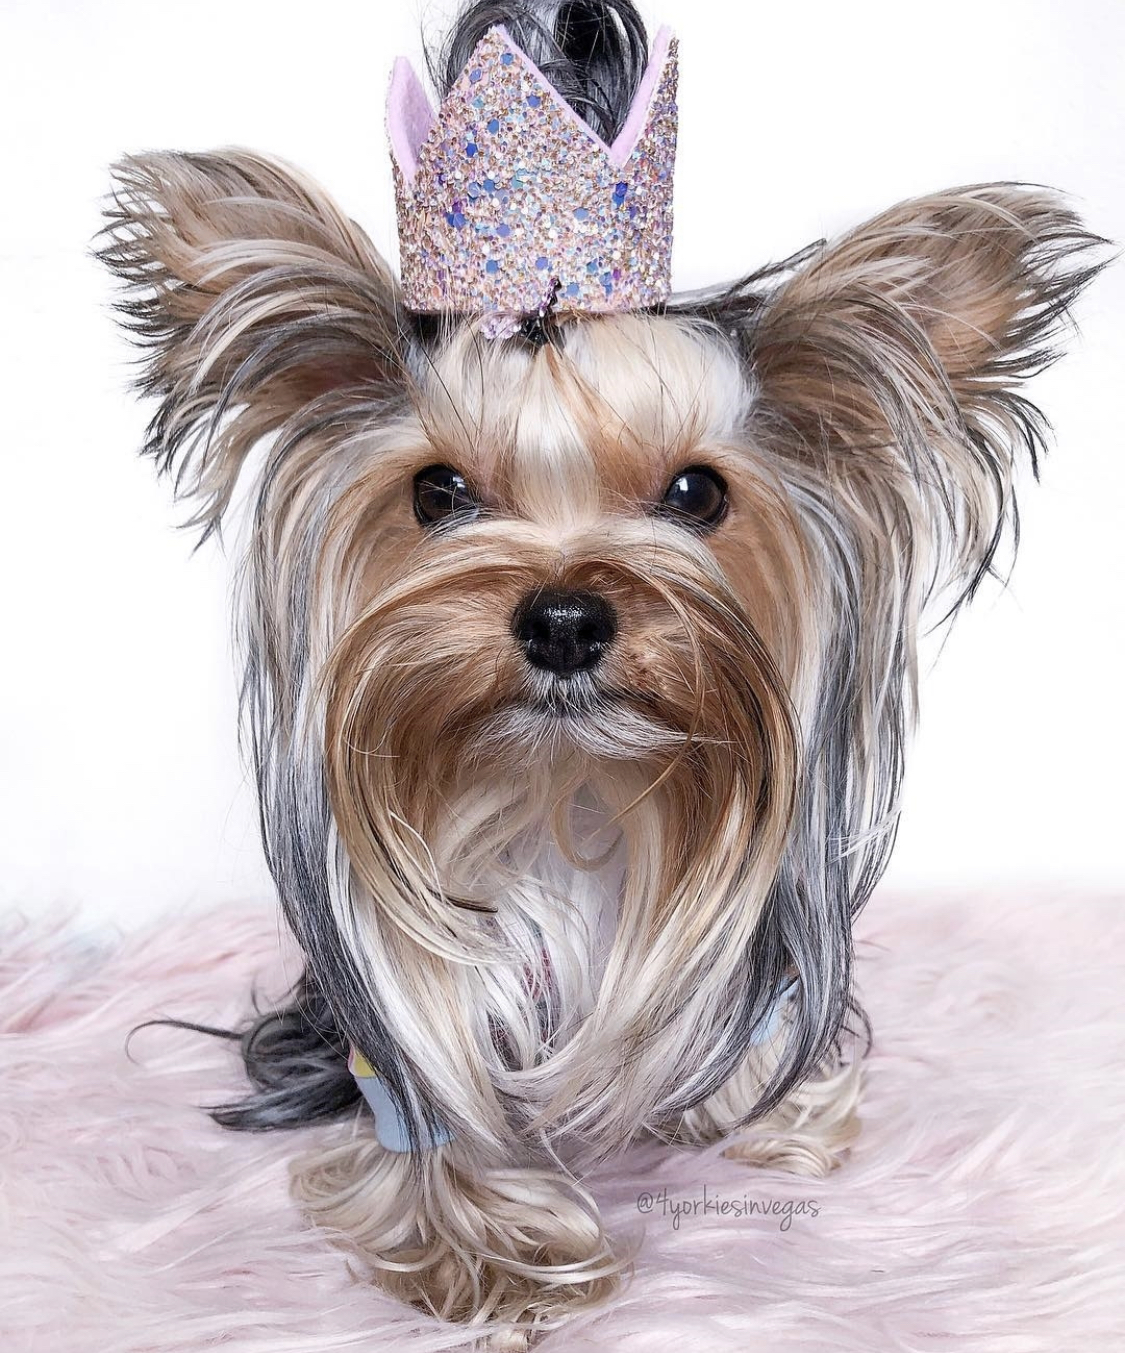 Yorkshire Terrier with long silky hair wearing glittery crown sitting on the white feathery carpet in a white background